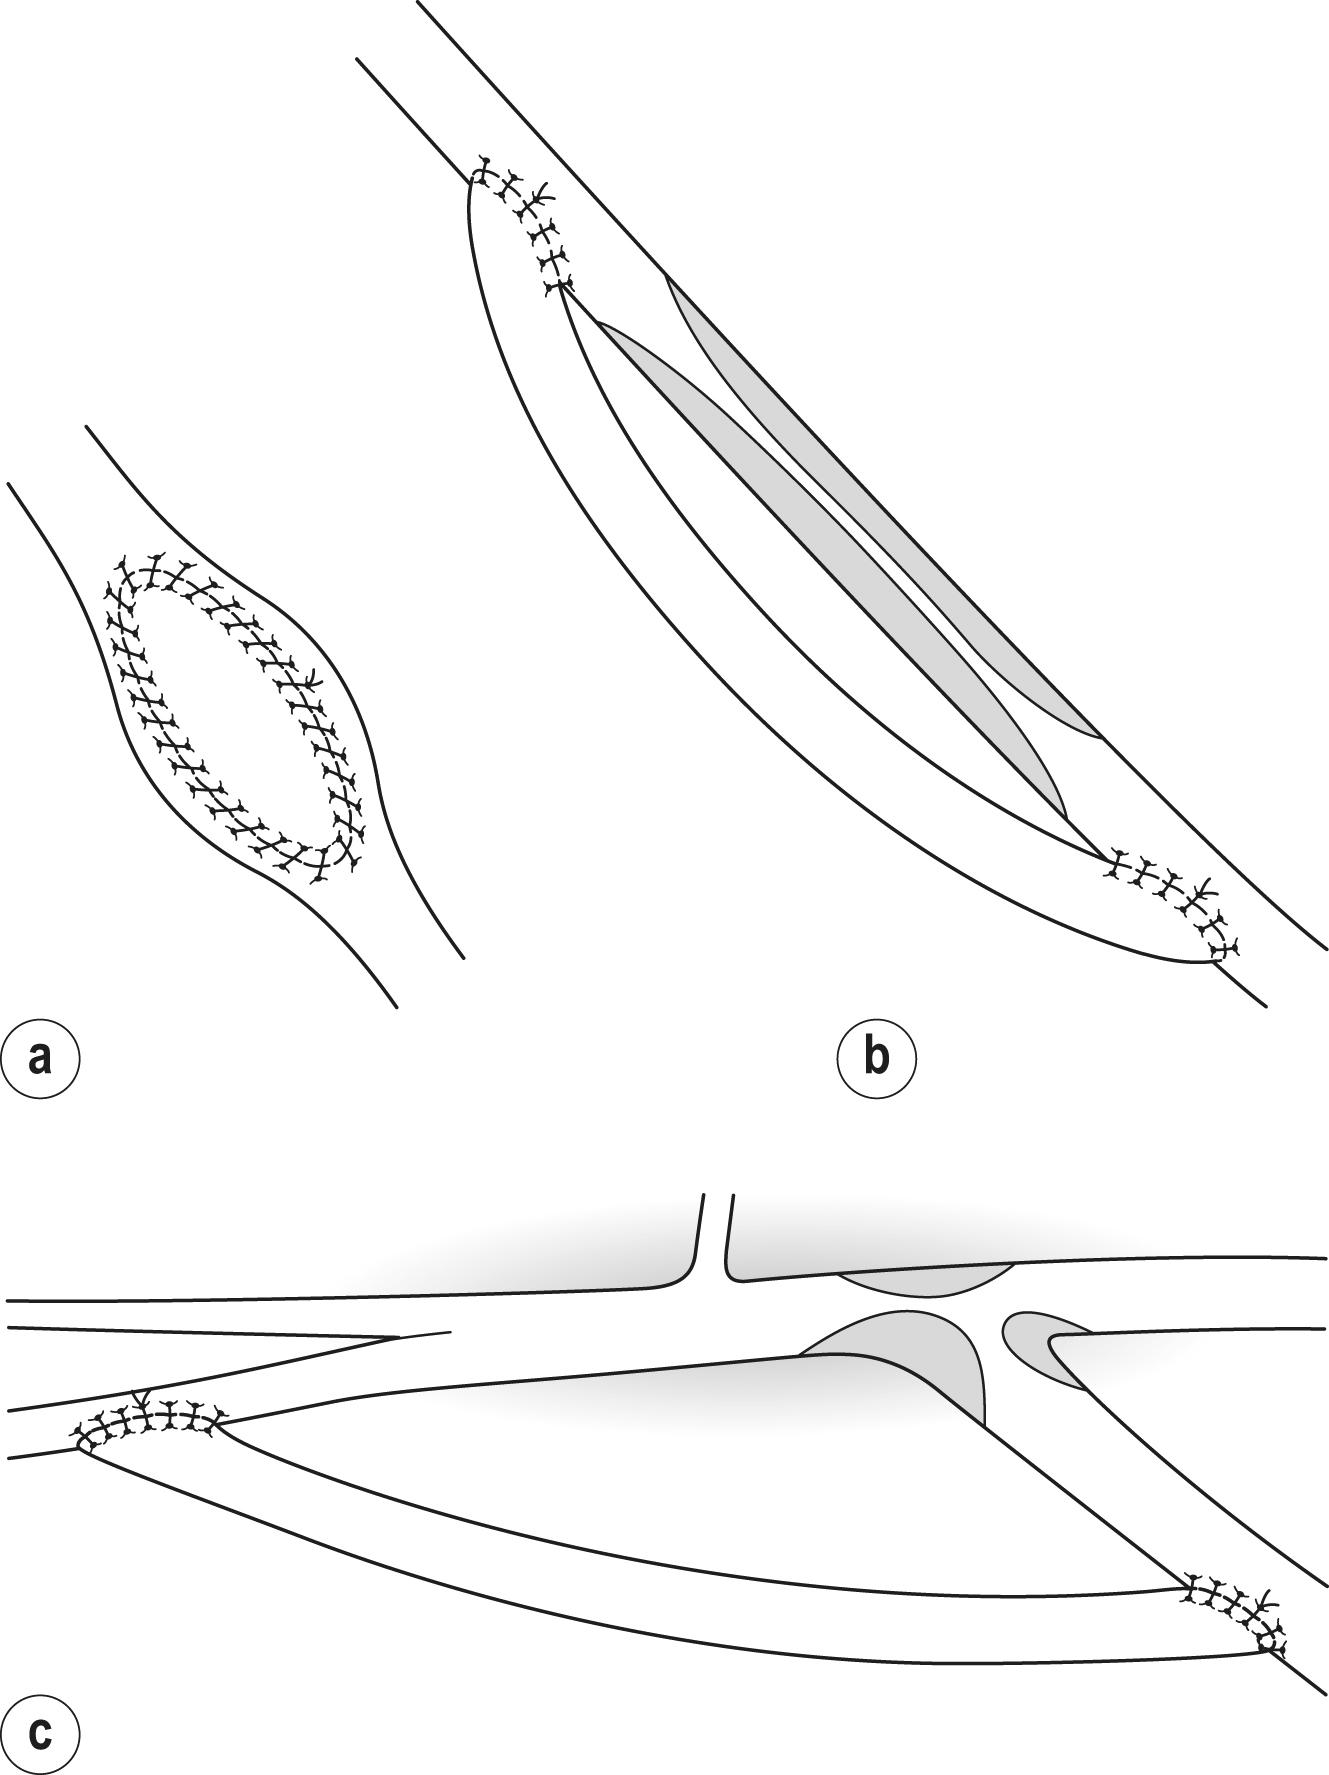 Figure 7.3, (a) Vein patch angioplasty, (b) bypass of long vein graft stenosis and (c) jump graft around stenosed distal anastomosis of a femoropopliteal bypass graft to the popliteal artery.